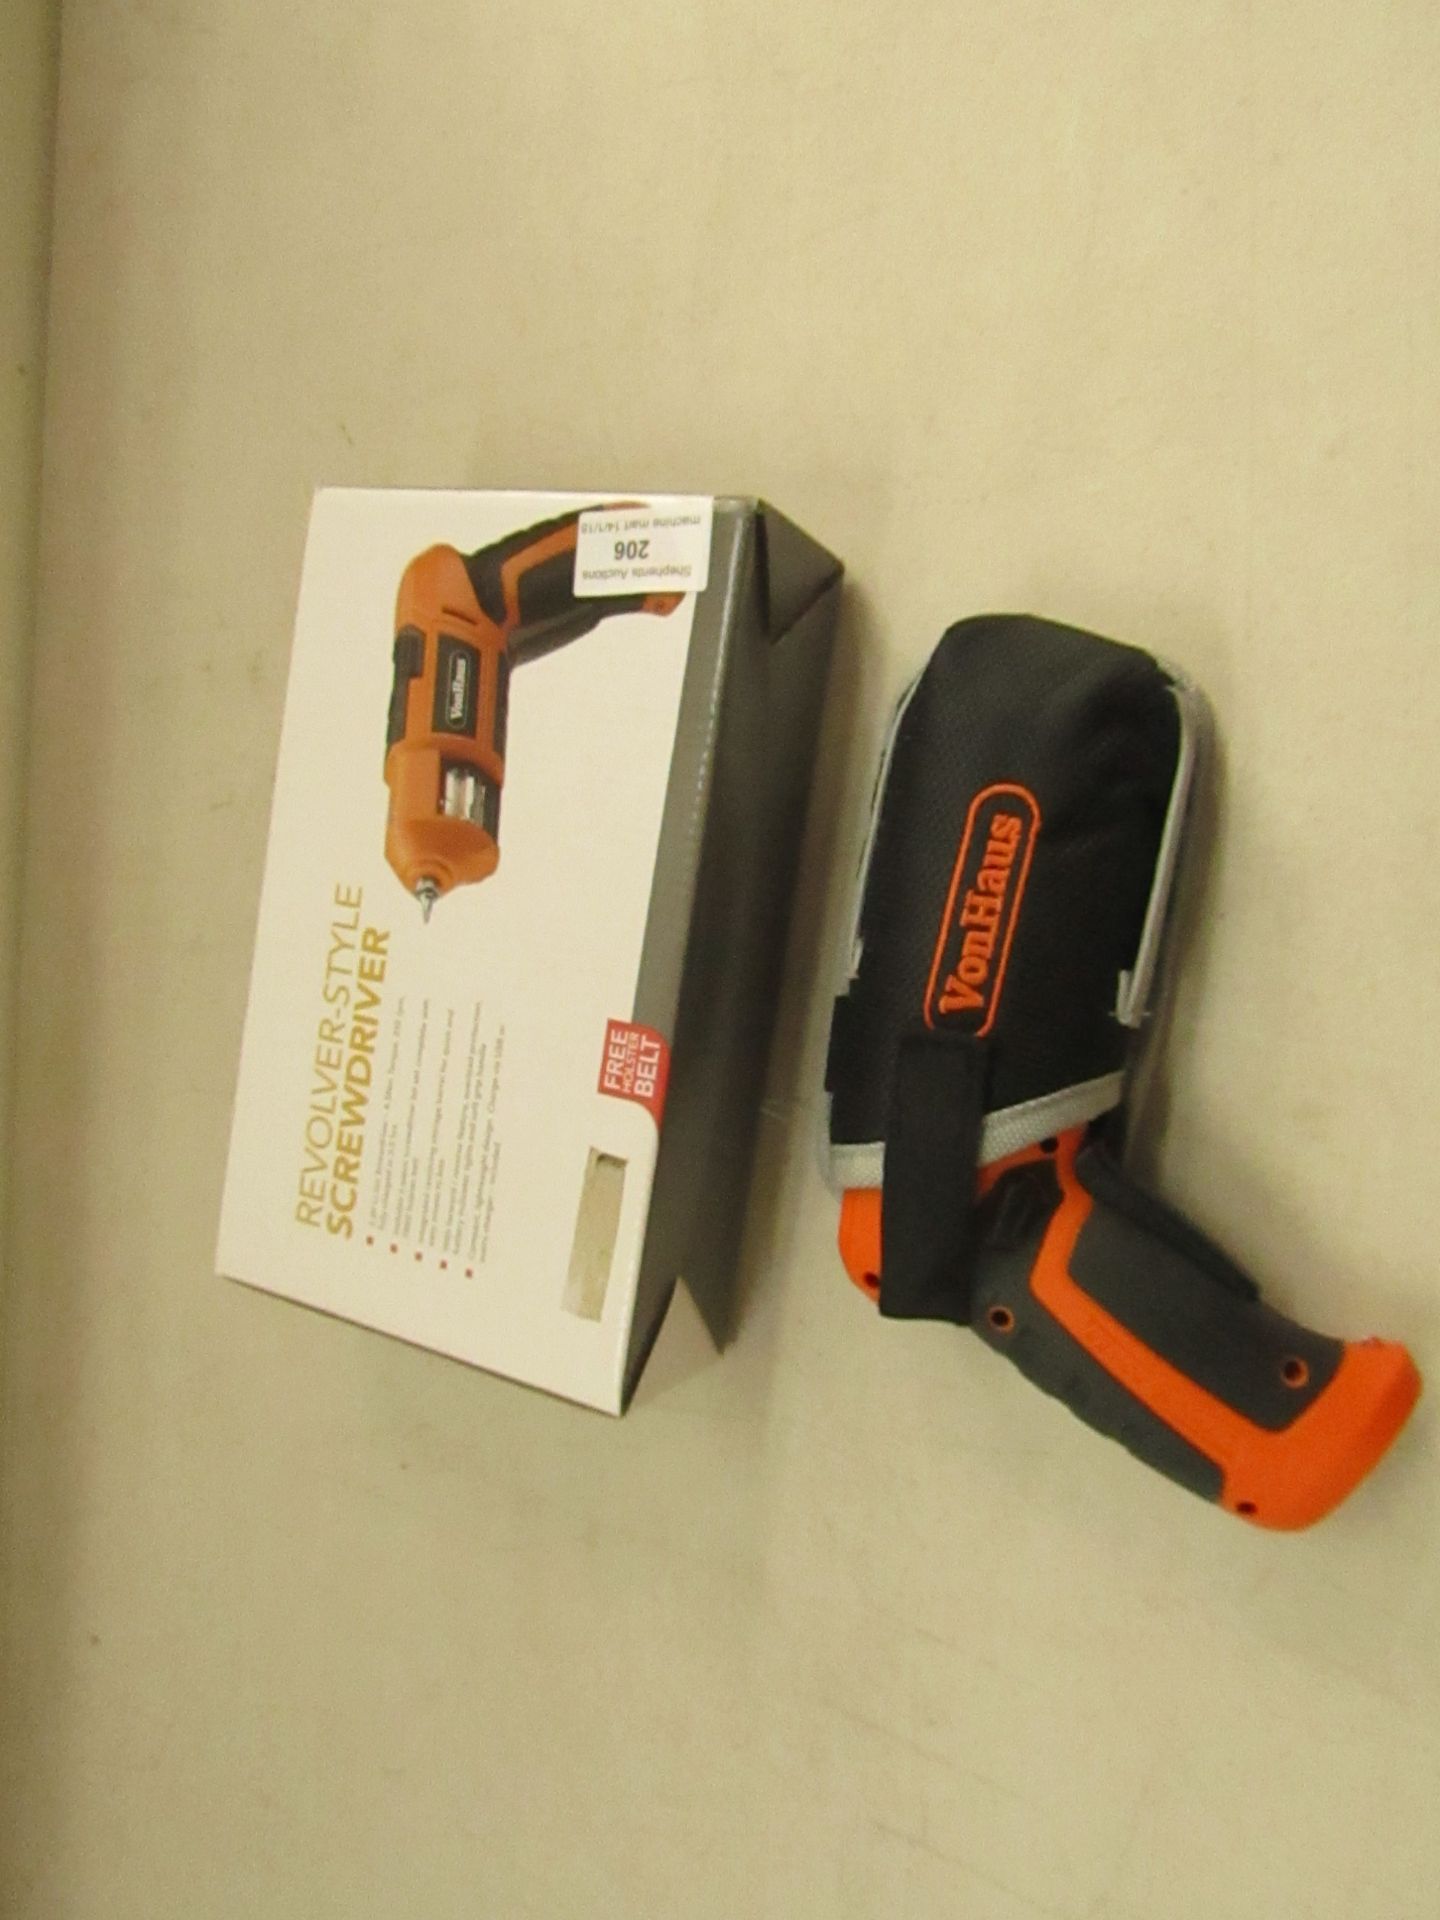 Revolver style screwdriver with holder and charger, tested working and boxed. Please note by bidding